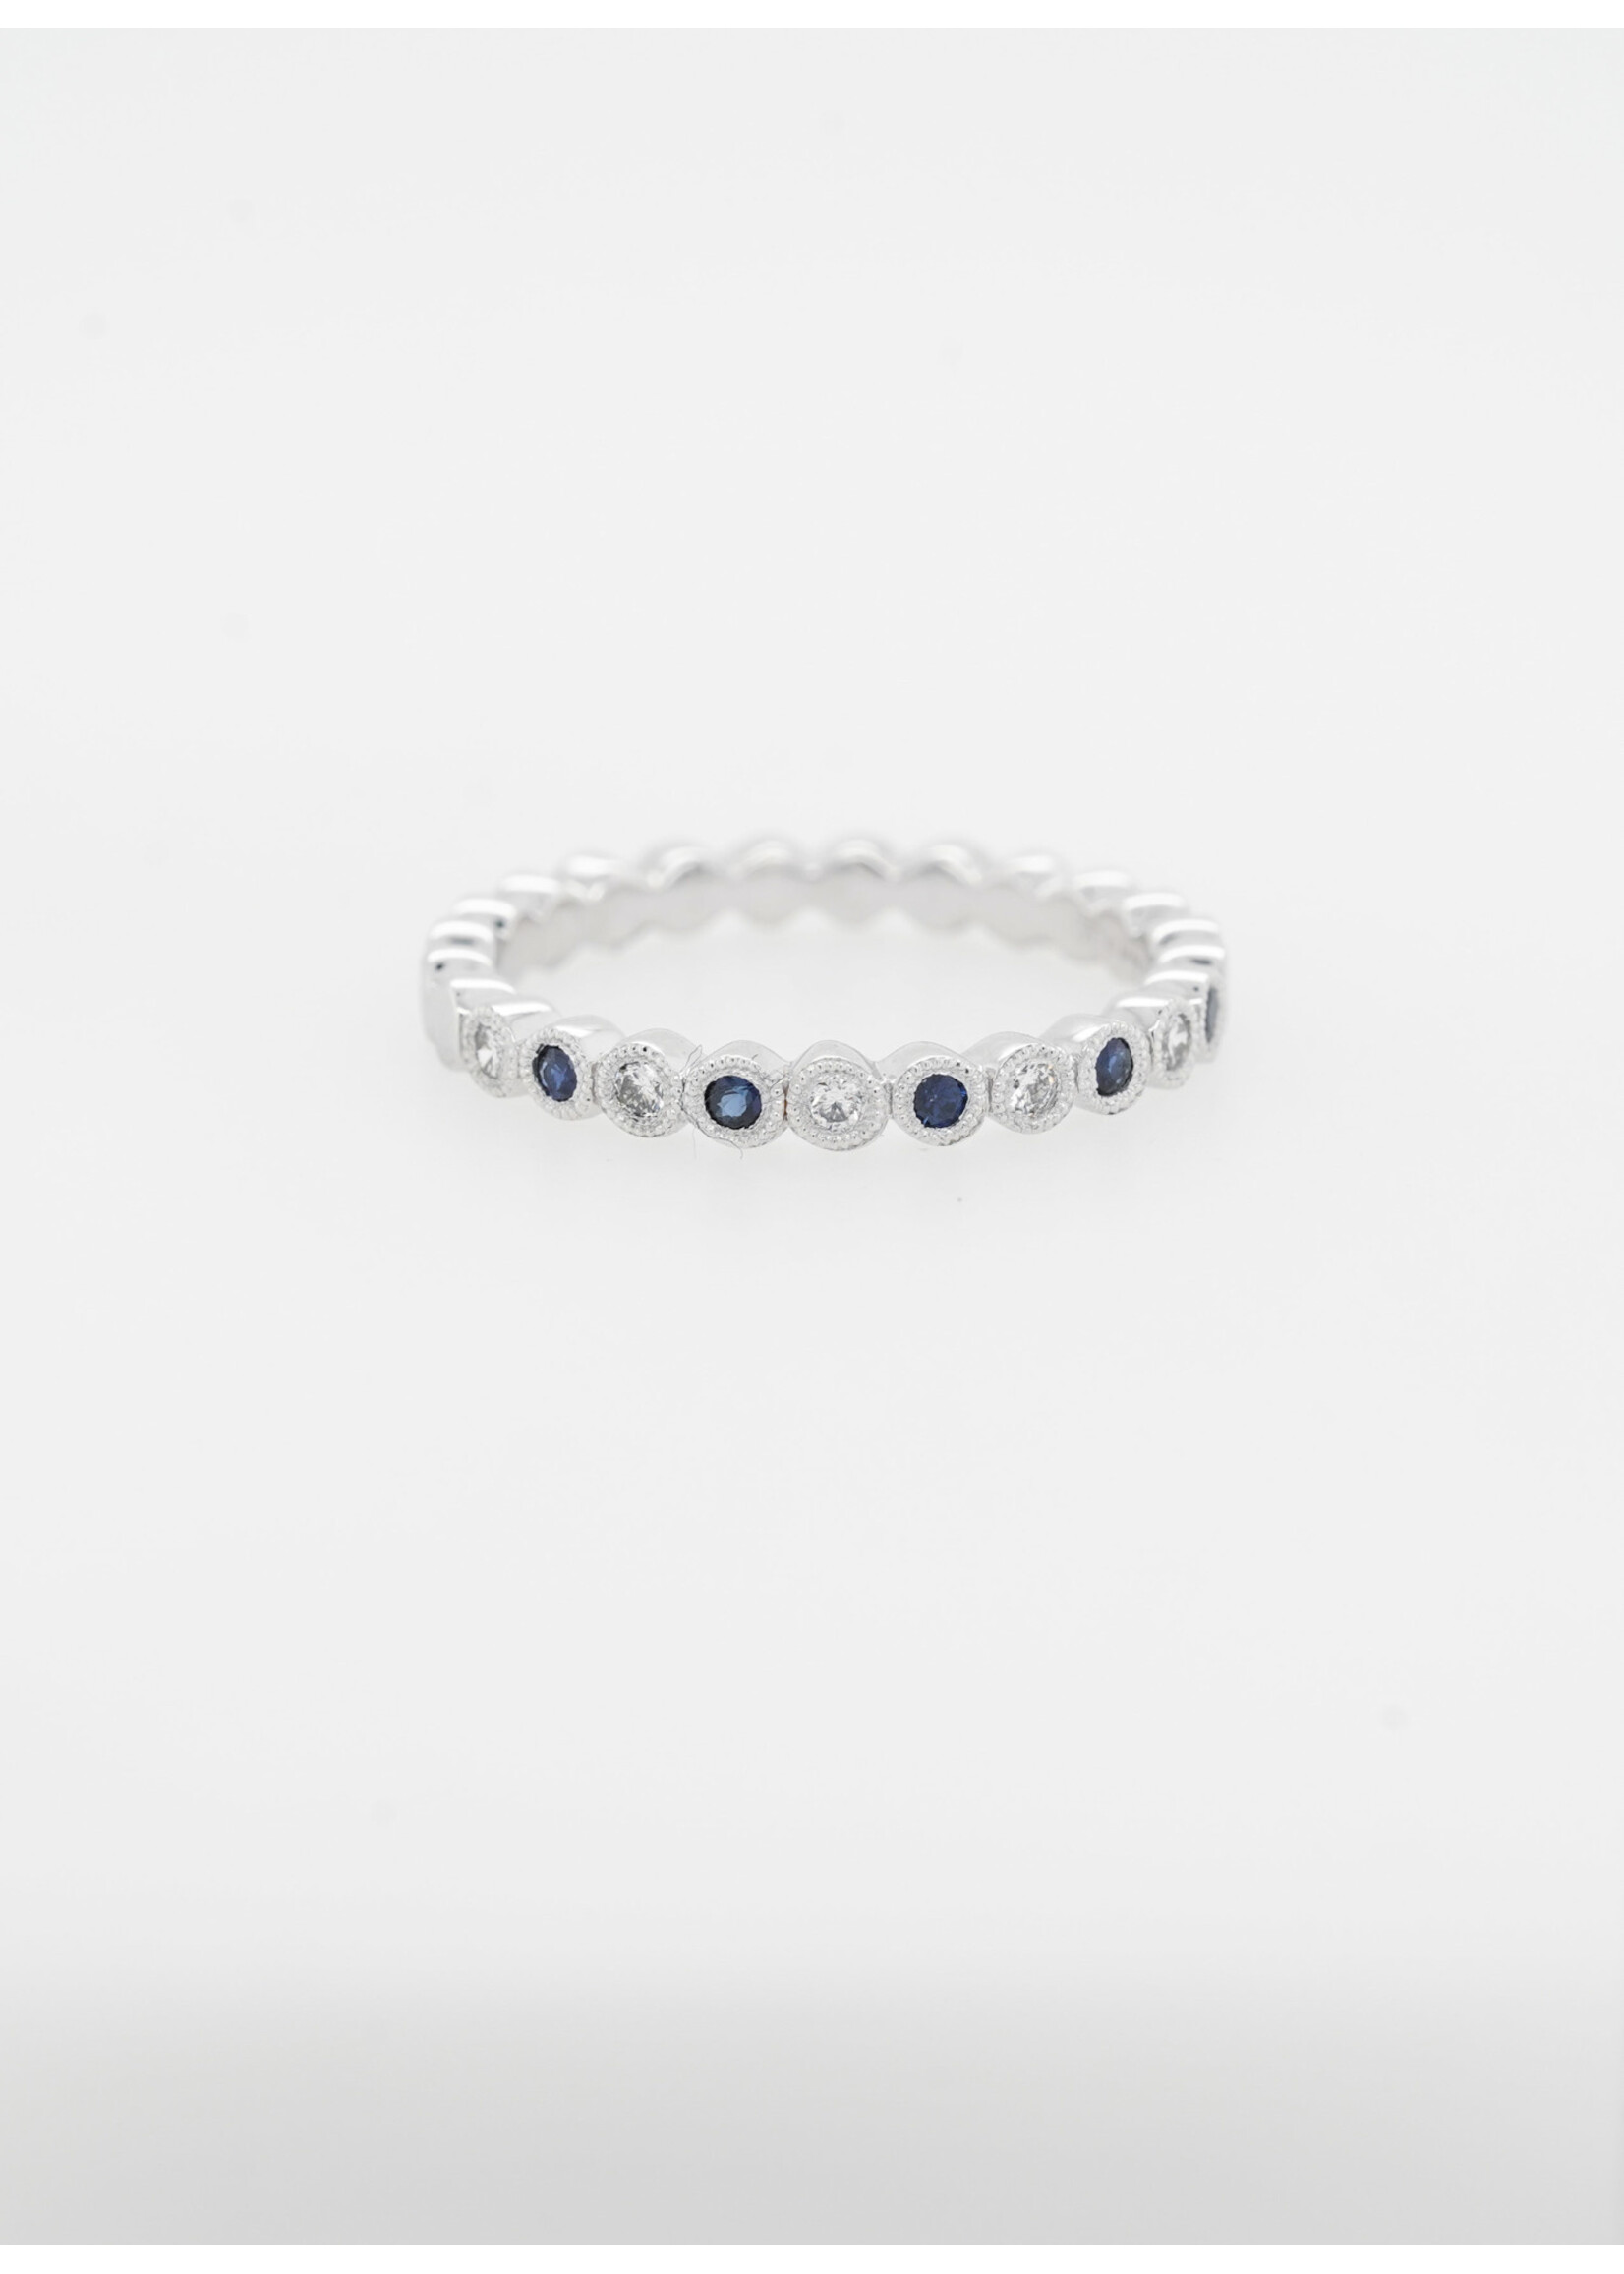 14KW 2.5g .11ctw Diamond .13ctw Sapphire Stackable Band (size 6.5)